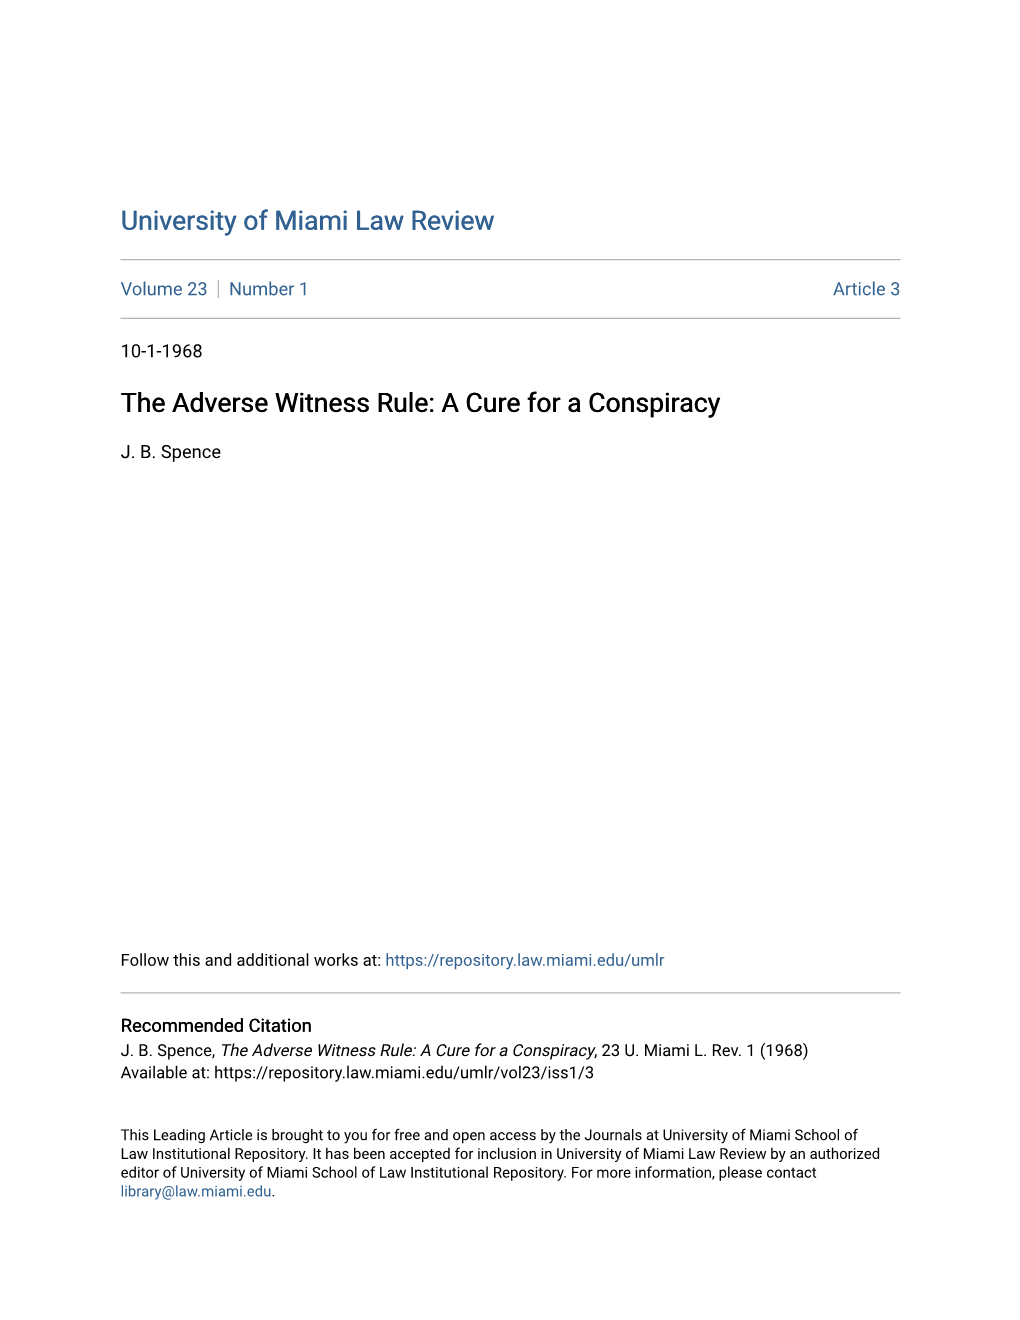 The Adverse Witness Rule: a Cure for a Conspiracy